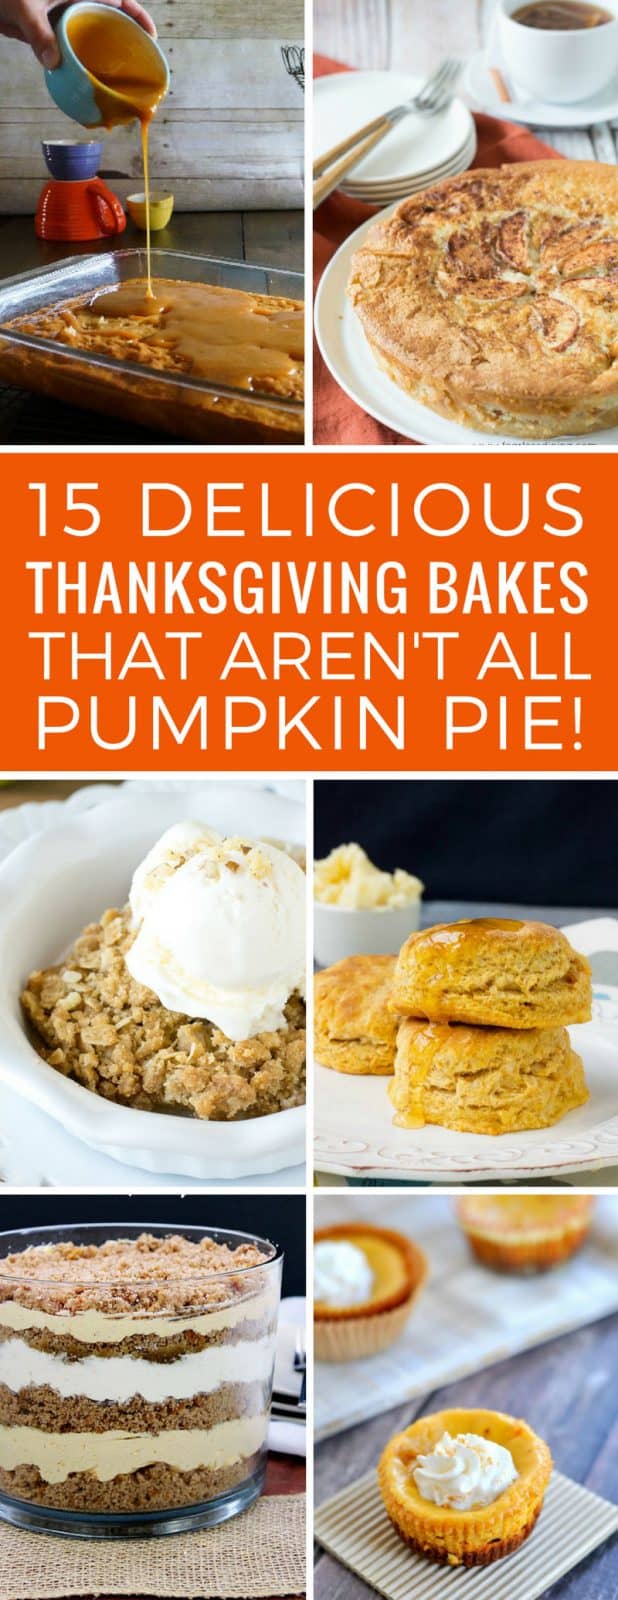 15 Easy Thanksgiving Baking Ideas that'll Have Your Guests Asking for More!